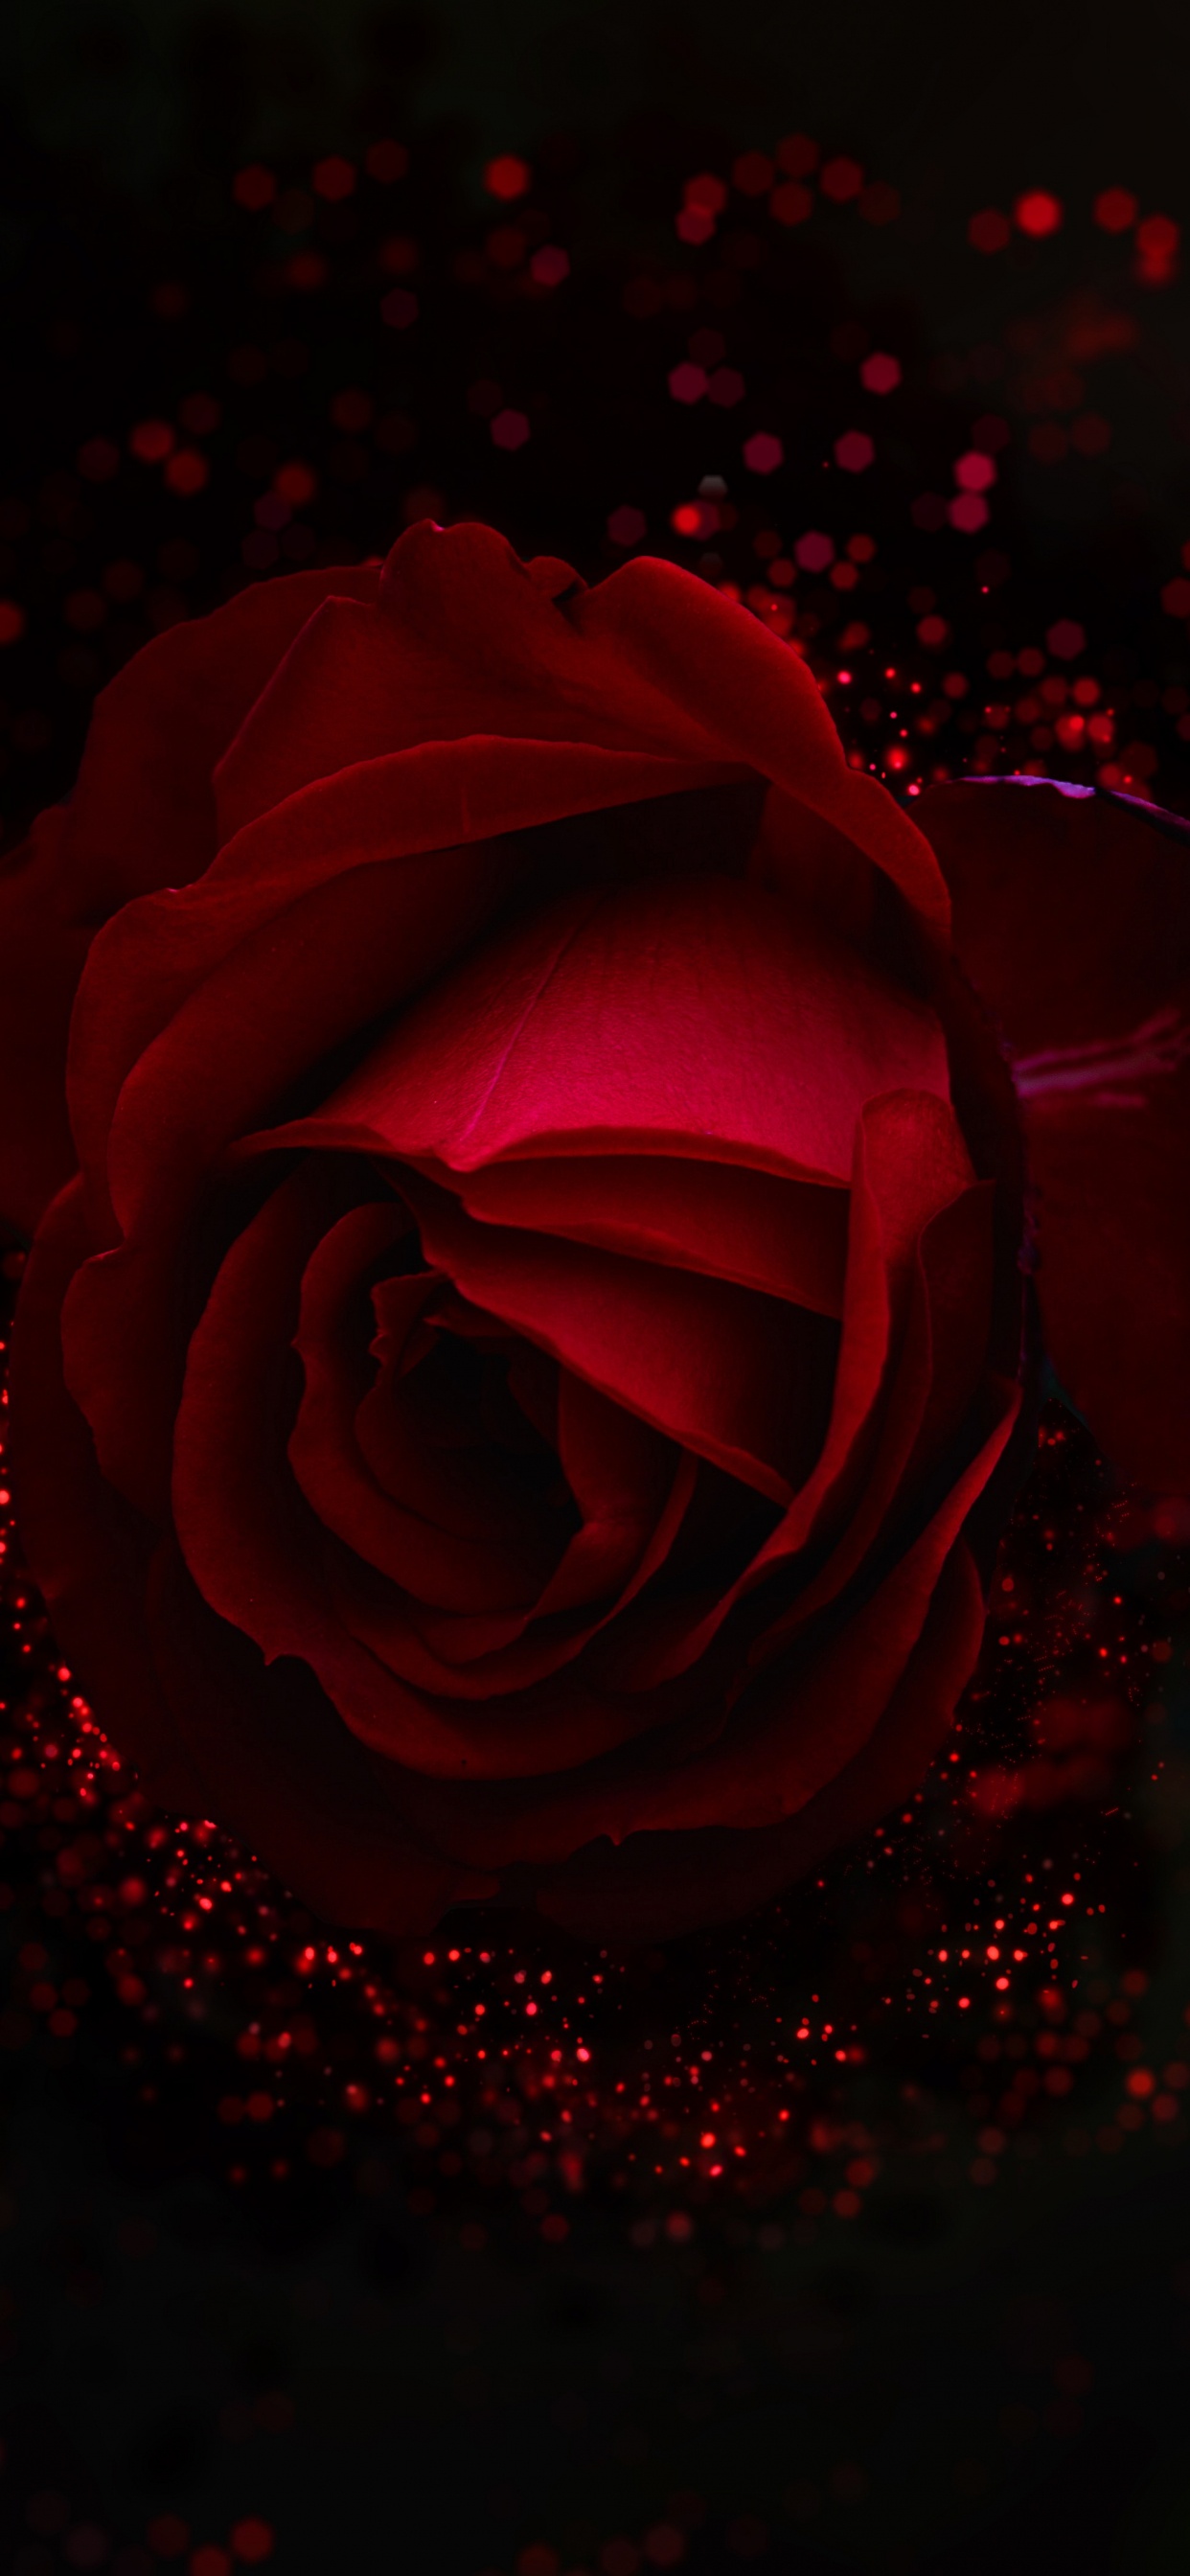 Red Rose With Water Droplets. Wallpaper in 1242x2688 Resolution